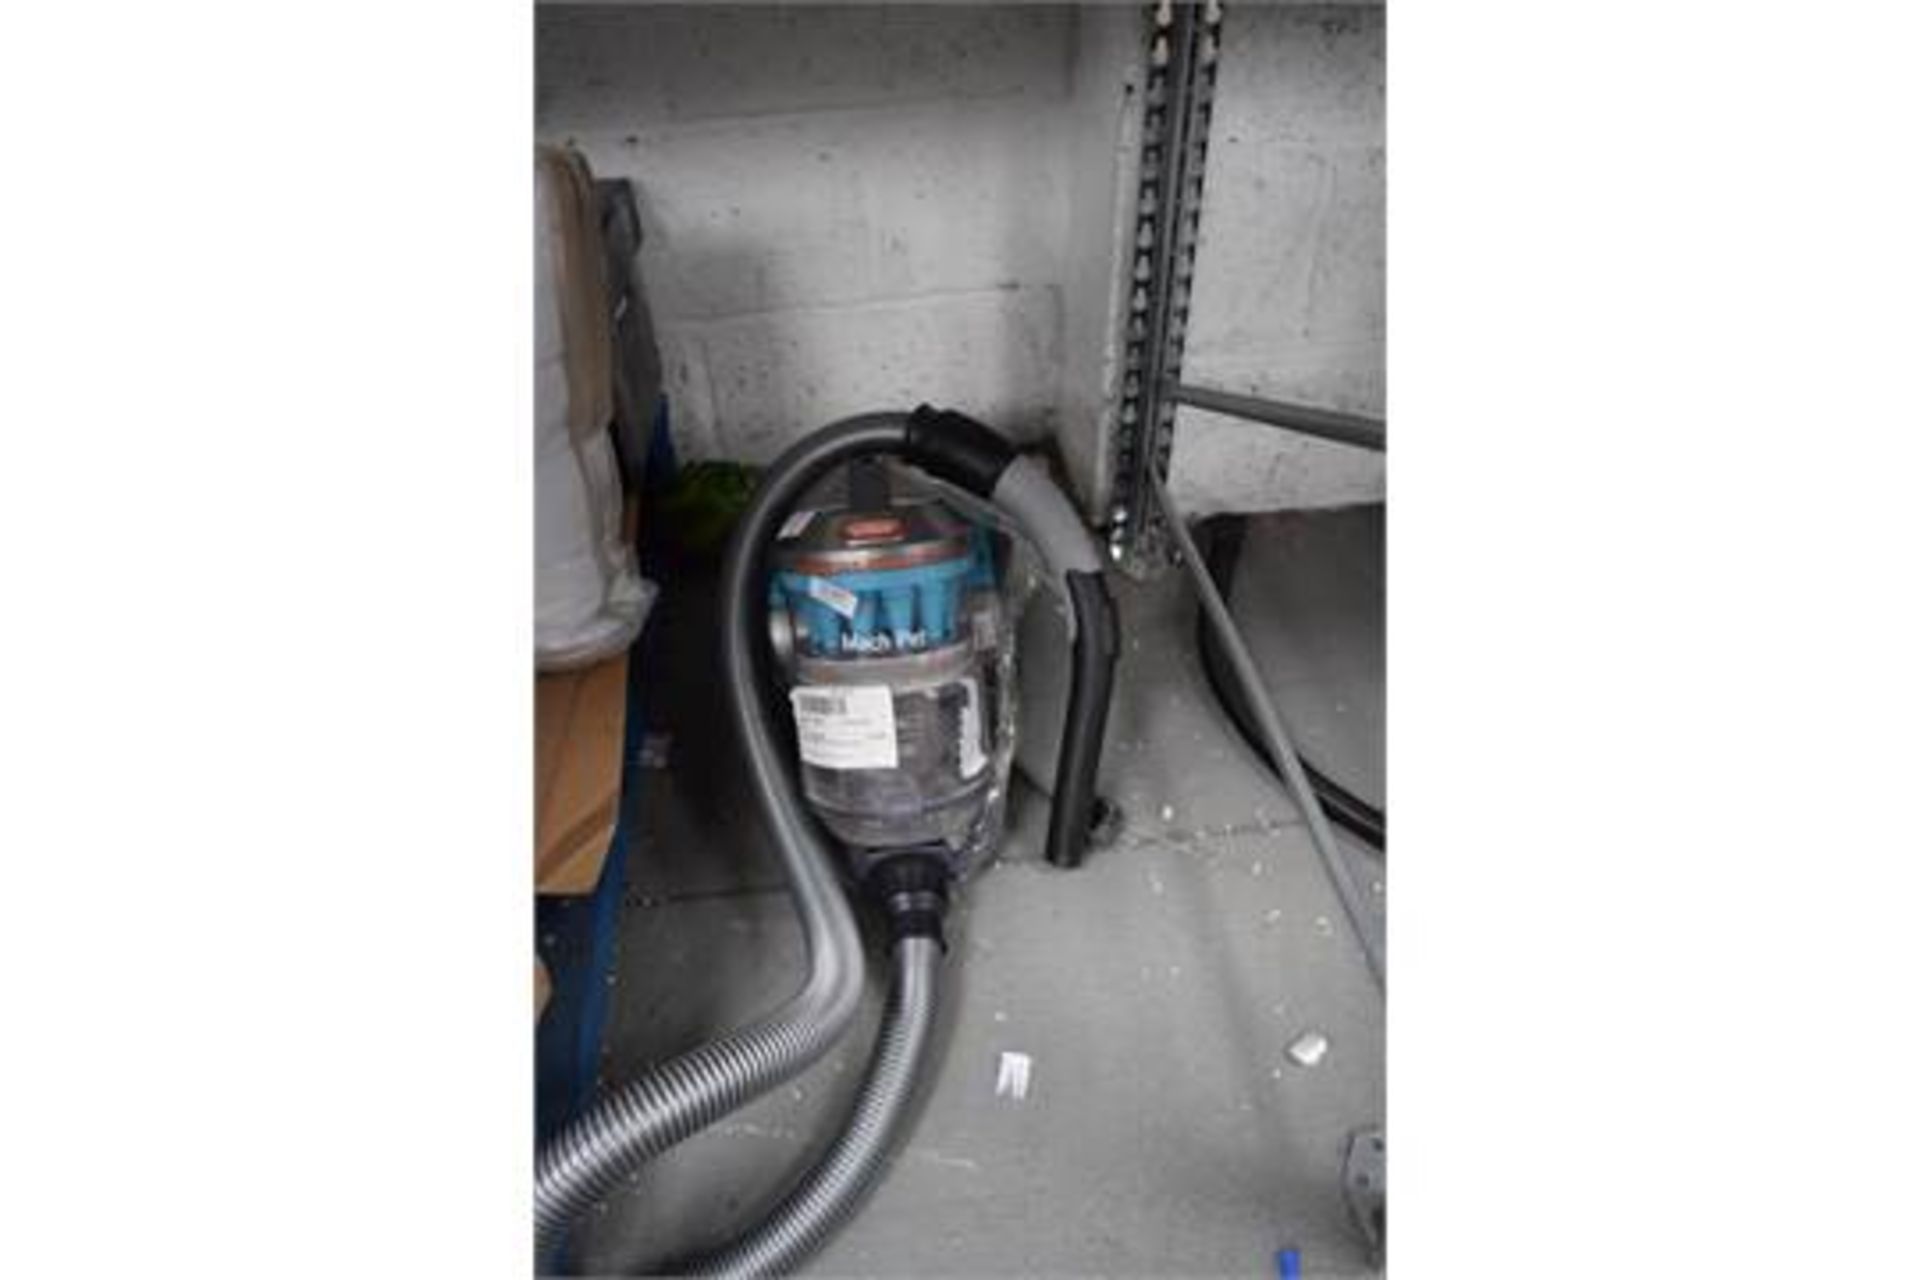 1 x VAX MAX PET VACUUM CLEANER RRP £200 31.05.17 *PLEASE NOTE THAT THE BID PRICE IS MULTIPLIED BY